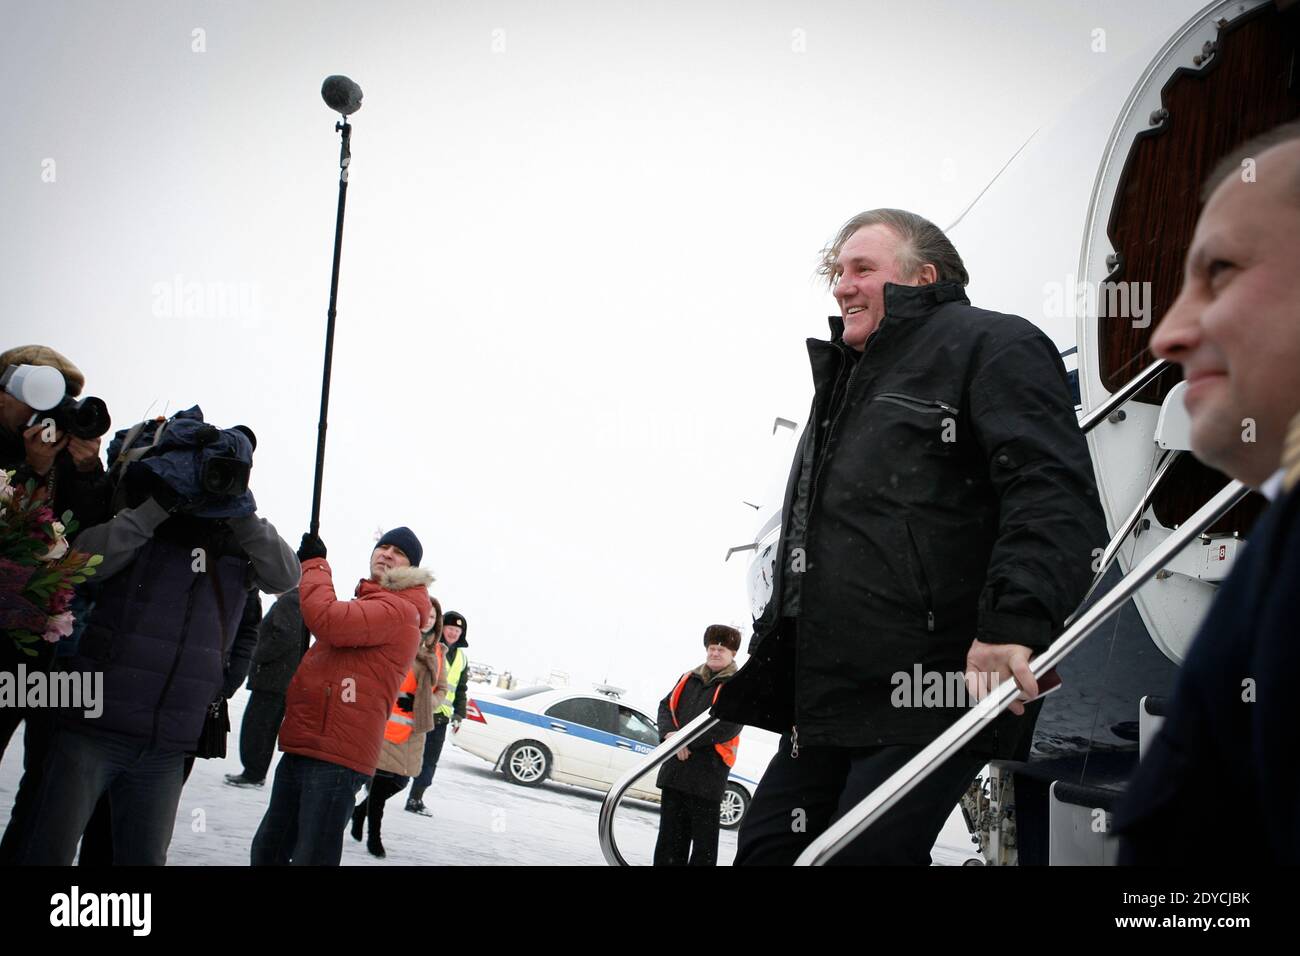 French actor Gerard Depardieu who was granted Russian citizenship is welcomed upon his arrival at the airport of Saransk, Mordovia, Russia, January 6, 2013. Photo by Marine Dumeurger/ABACAPRESS.COM Stock Photo